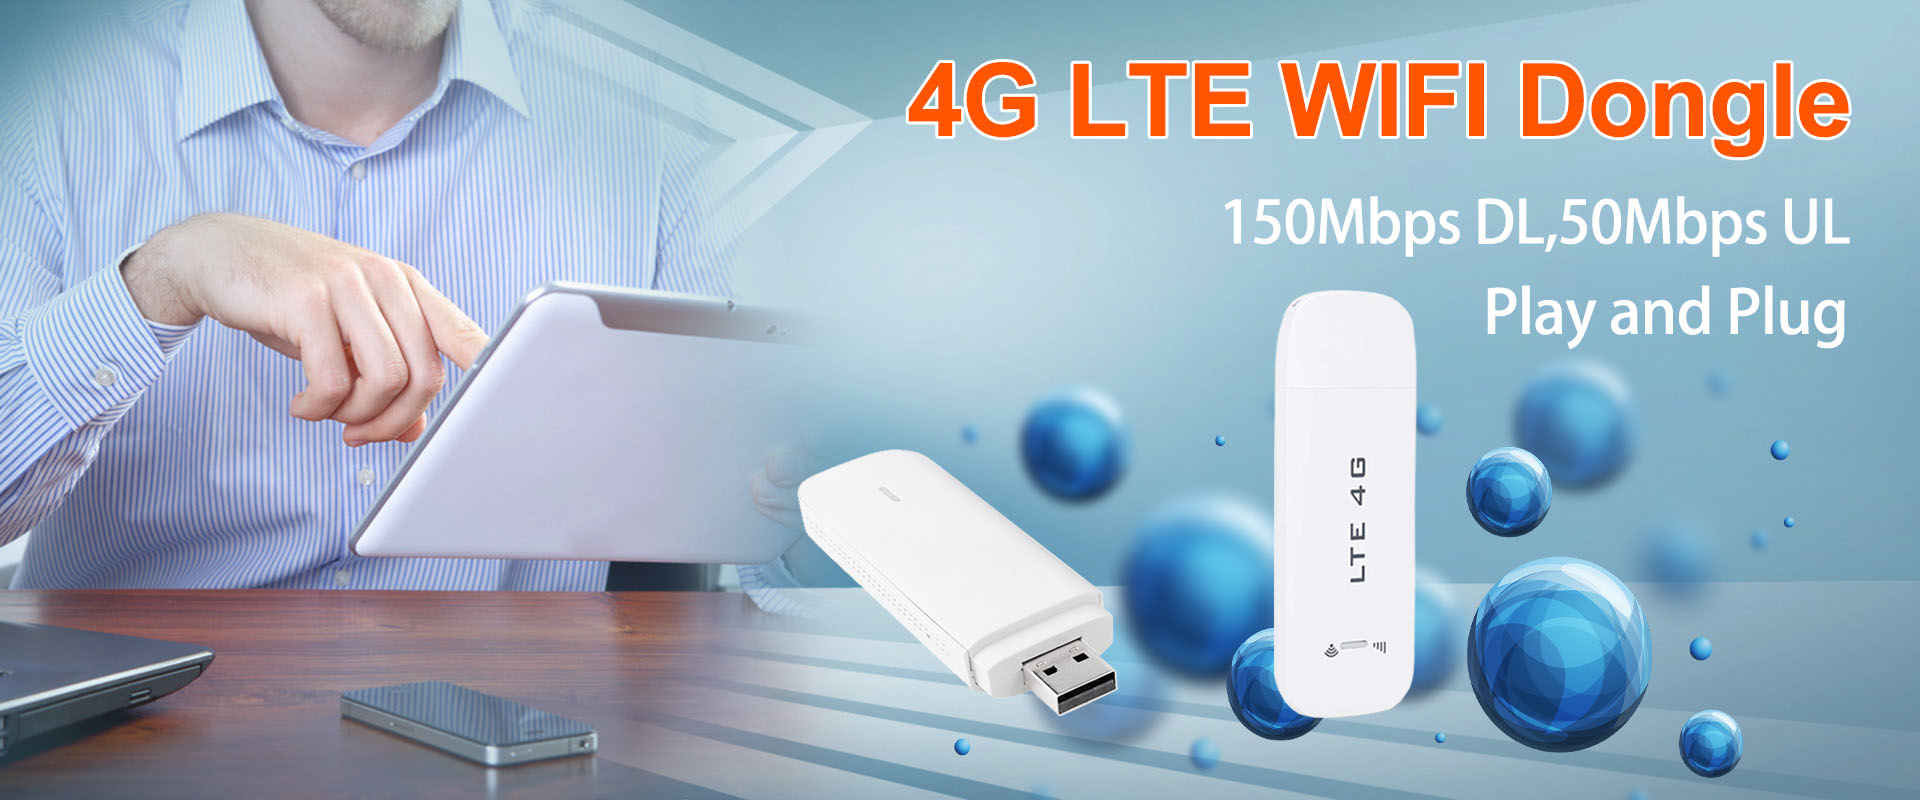 4G LTE WiFi Dongle,4G LTE USB Dongle